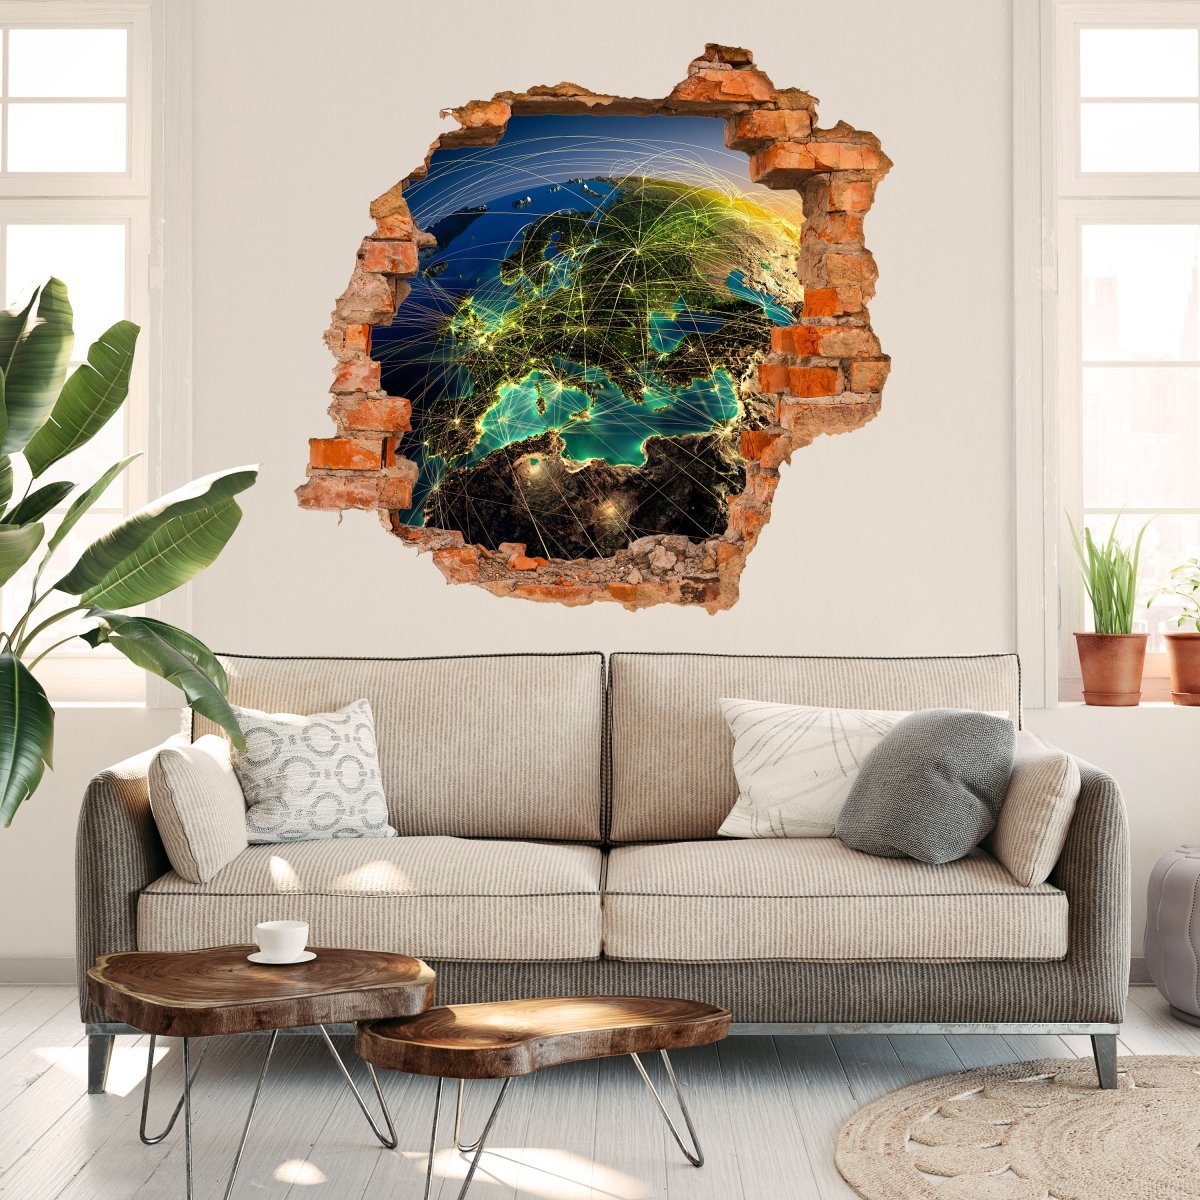 3D wall sticker Connected World - Wall Decal M0279